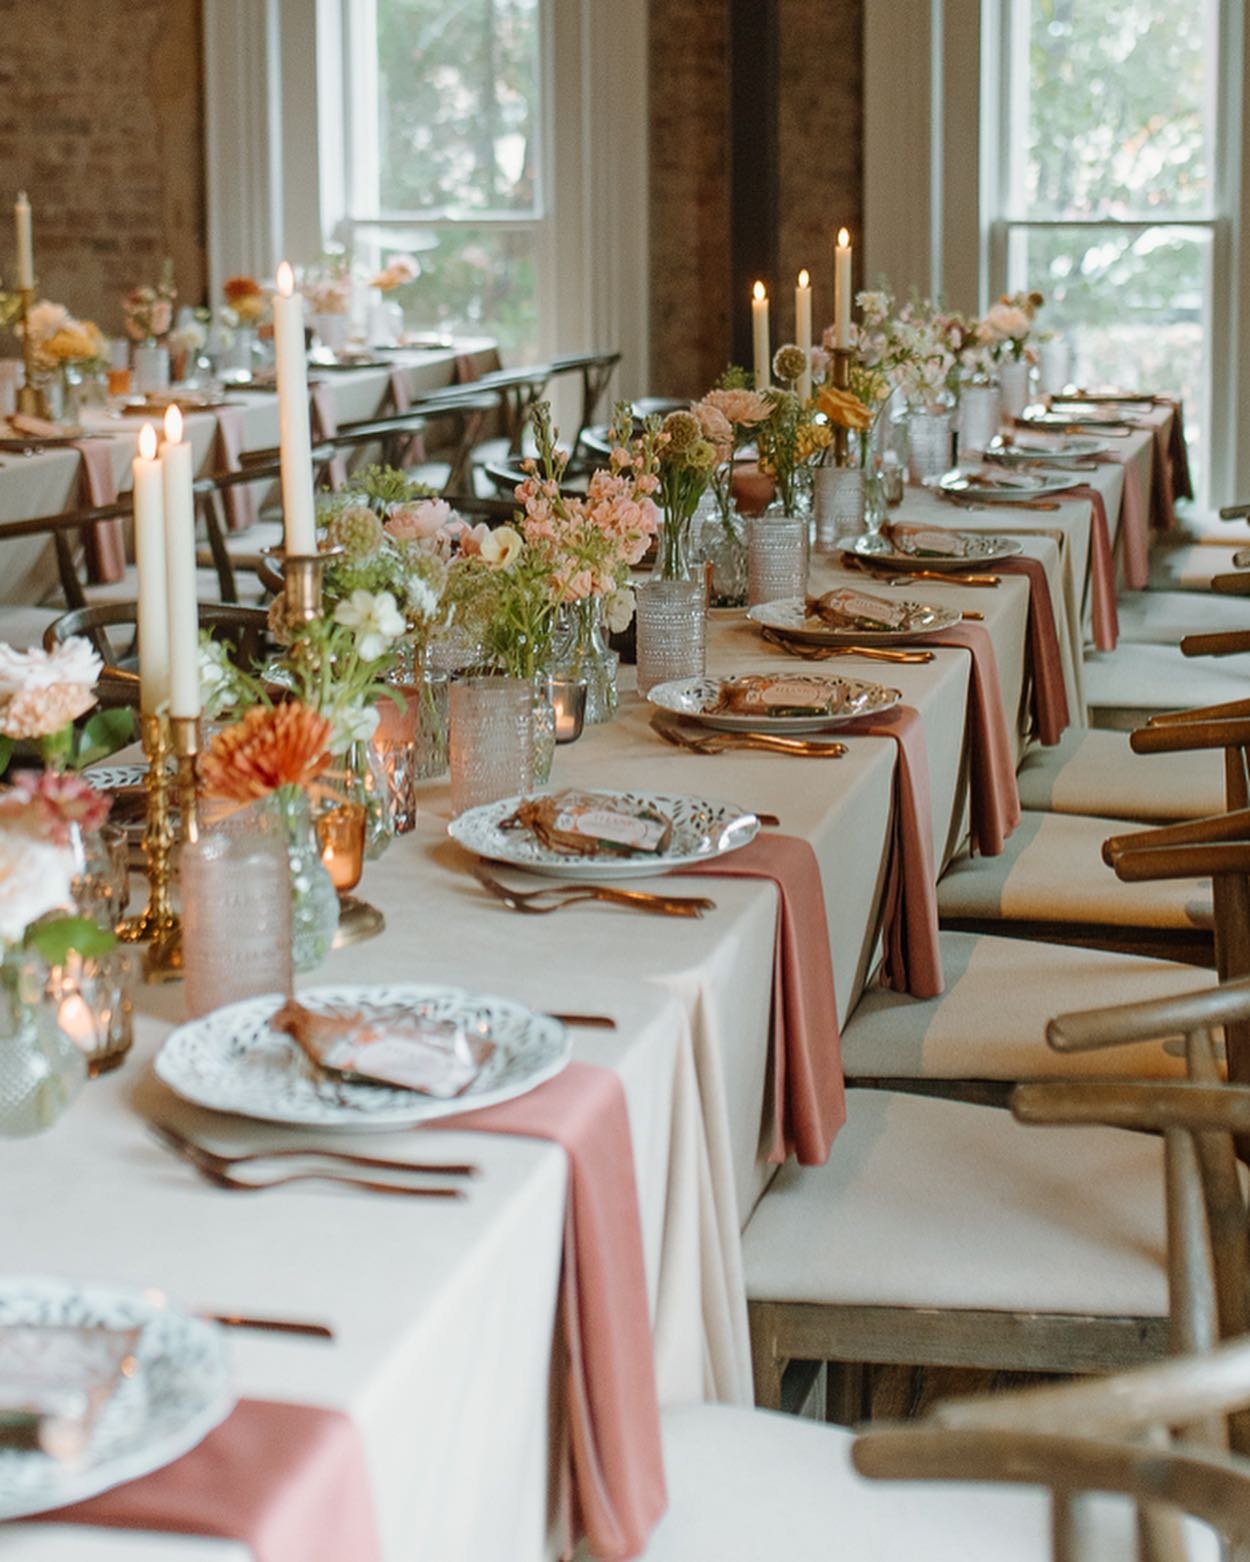 There&rsquo;s a moment of absolute beauty and calmness once all the tables are set, the candles are lit, and the guests have yet to enter the space. So many vendors working together to create this moment that will never happen again... oh, how specia